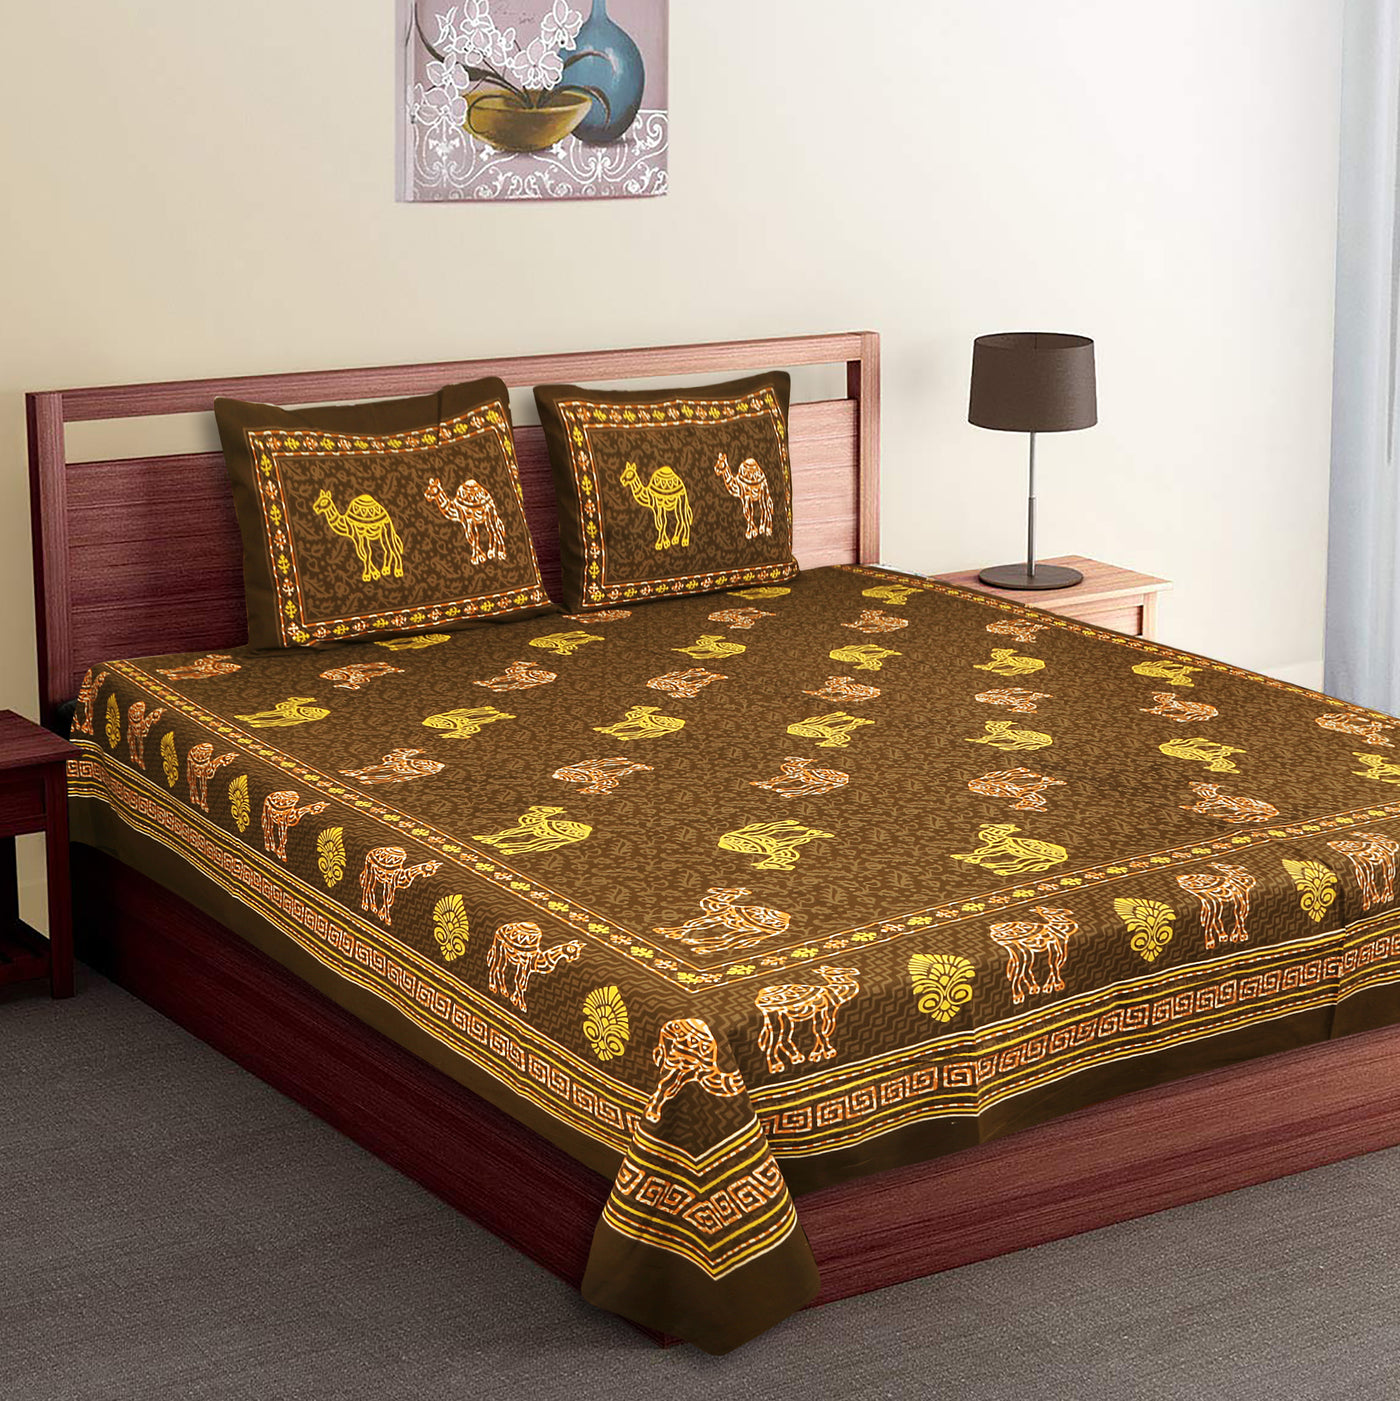 Bedsheet with pillow covers